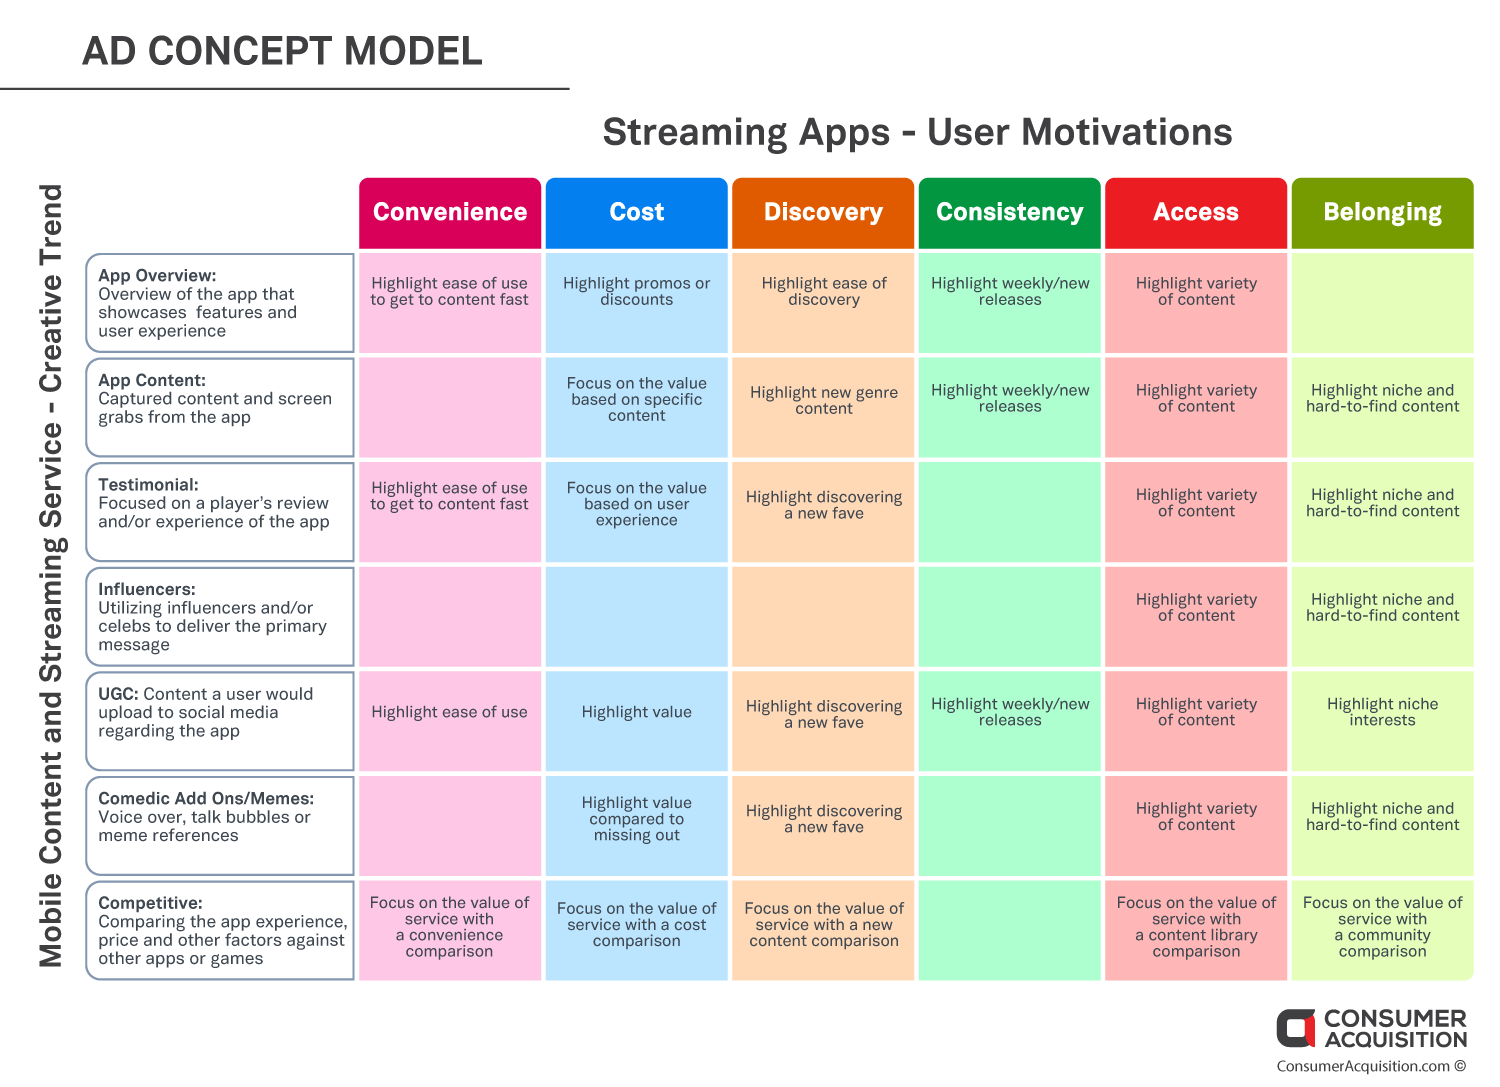 Ad Concept Model Streaming Apps User Motivations